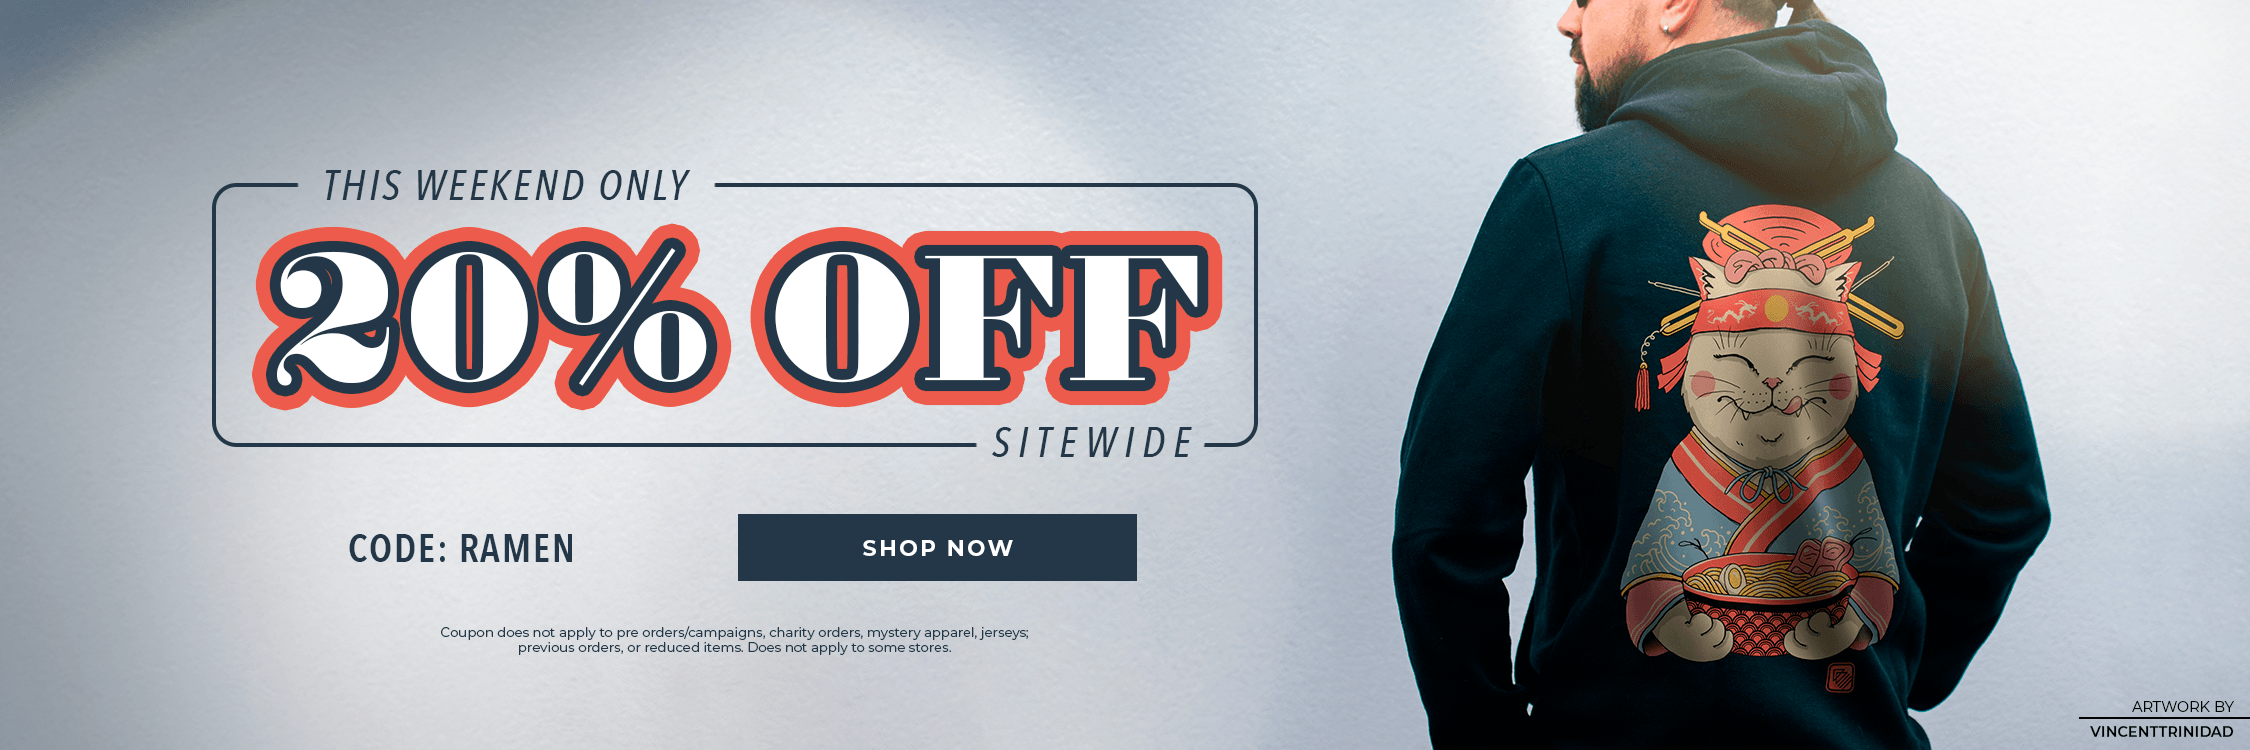 Last Day 20% Off Sitewide. Code RAMEN. Shop Now. Exclusions Apply. Man wearing cat pullover.